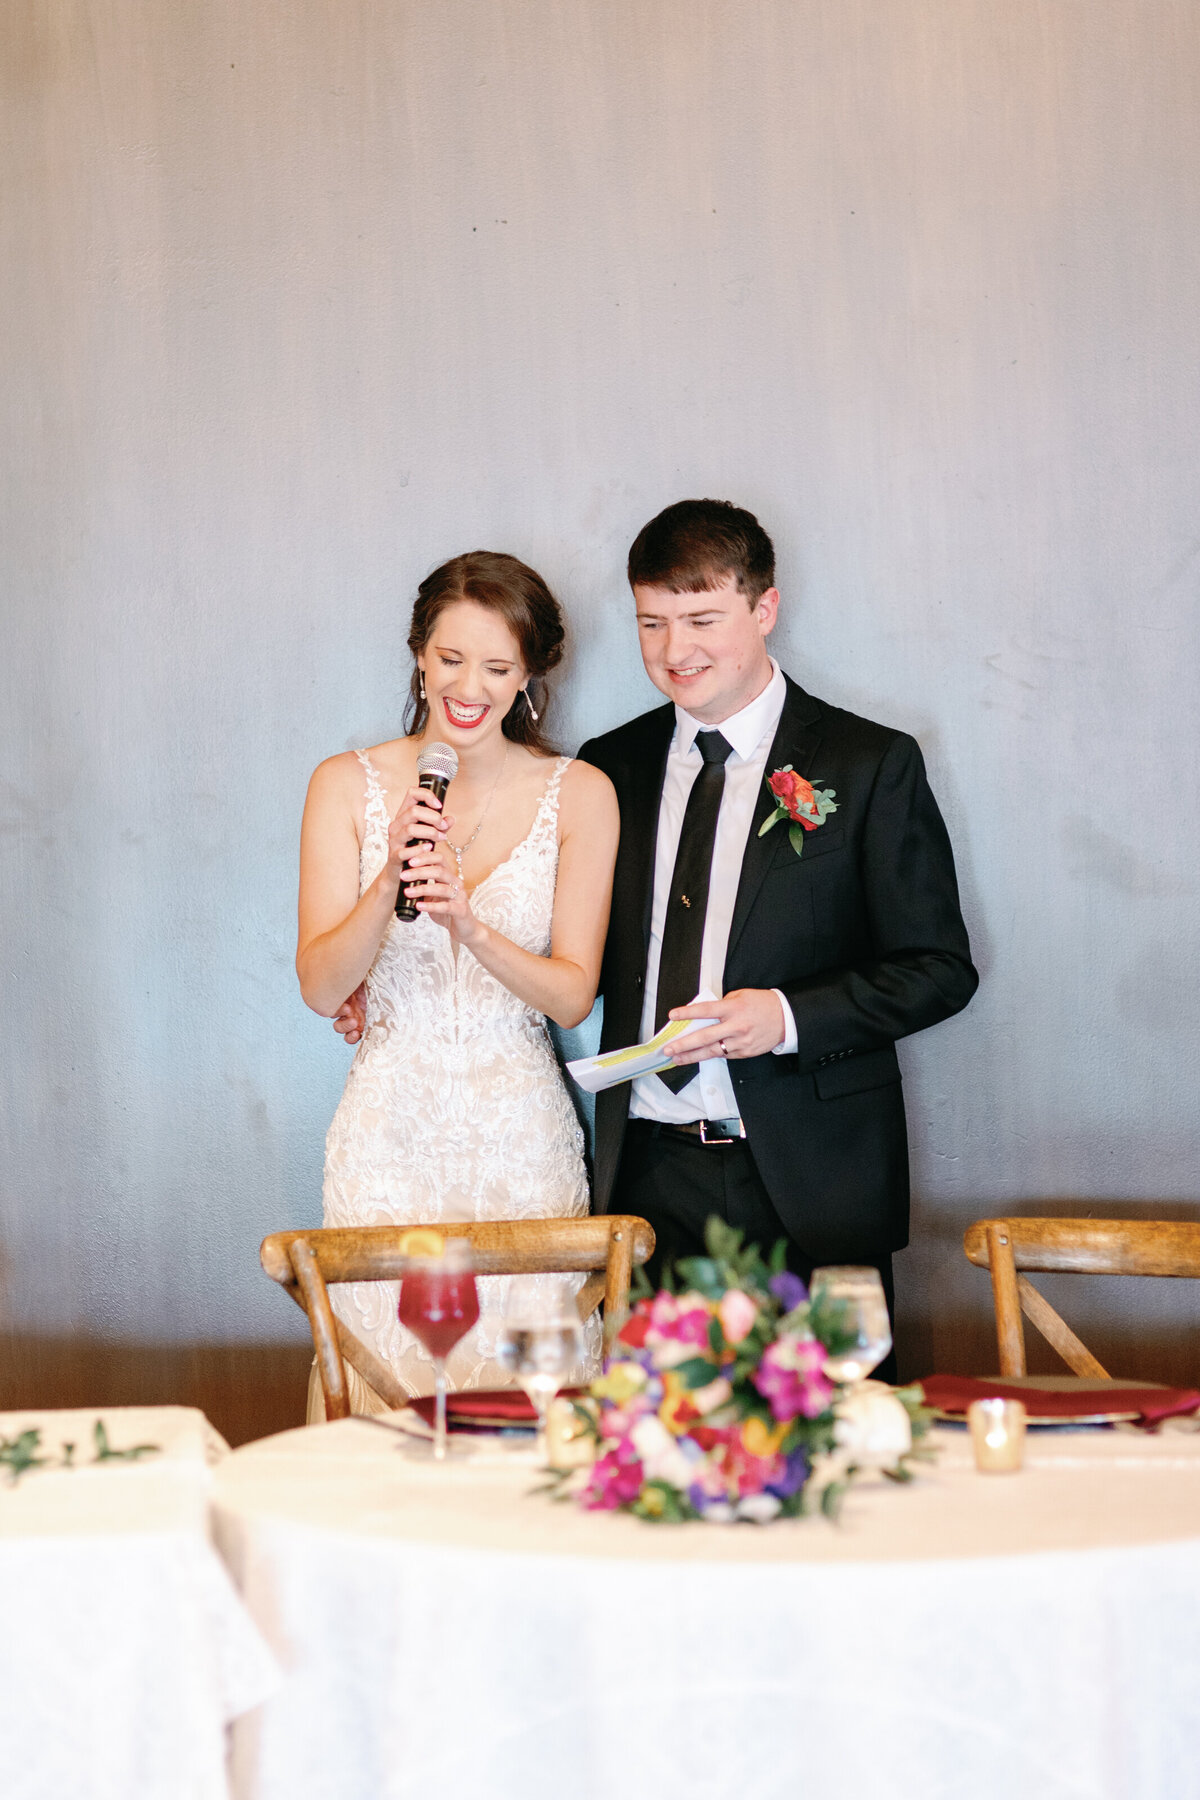 Sonja and Steven - Sacred Heart Cathedral and the Press Room - Reception - East Tennessee Wedding Photographer - Alaina René Photography-72